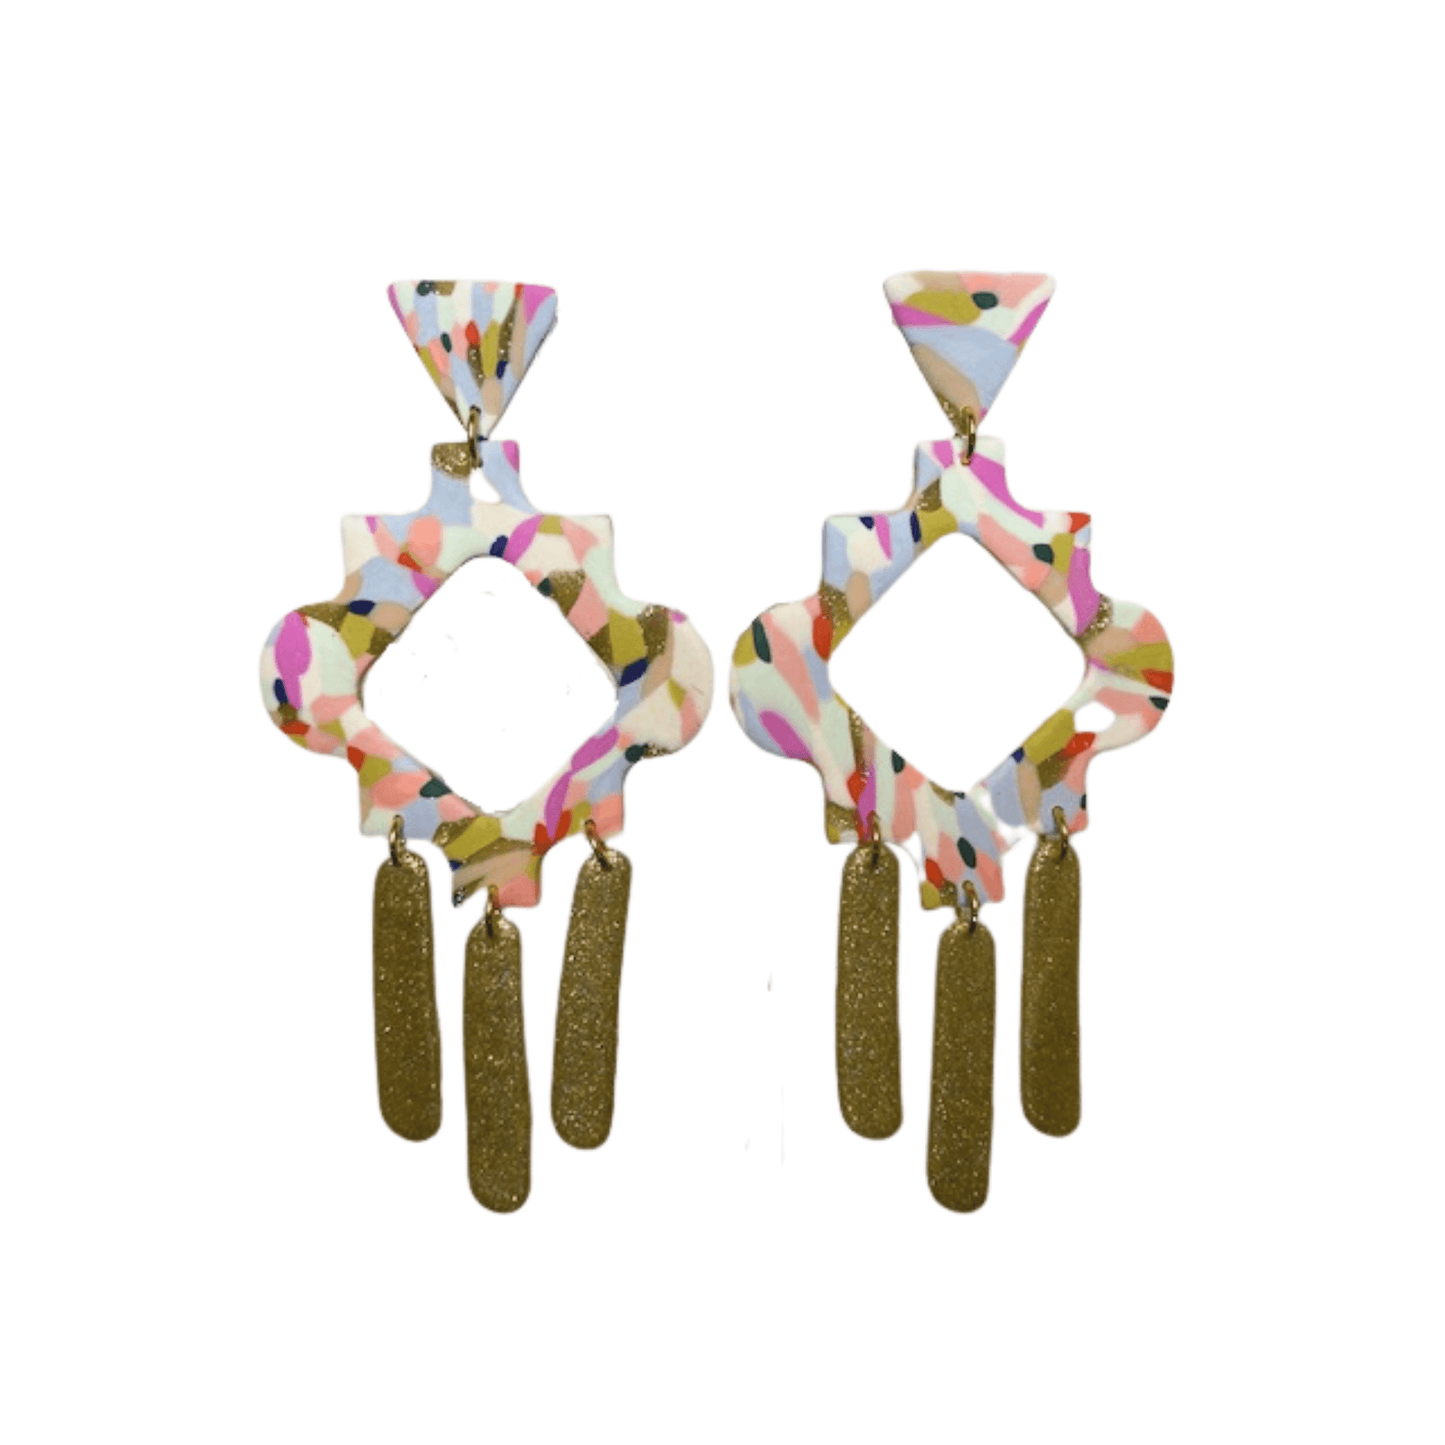 Accessories, Polymer Clay Aztec Earrings, Pink and Gold, Multicolor, Dangle Earrings